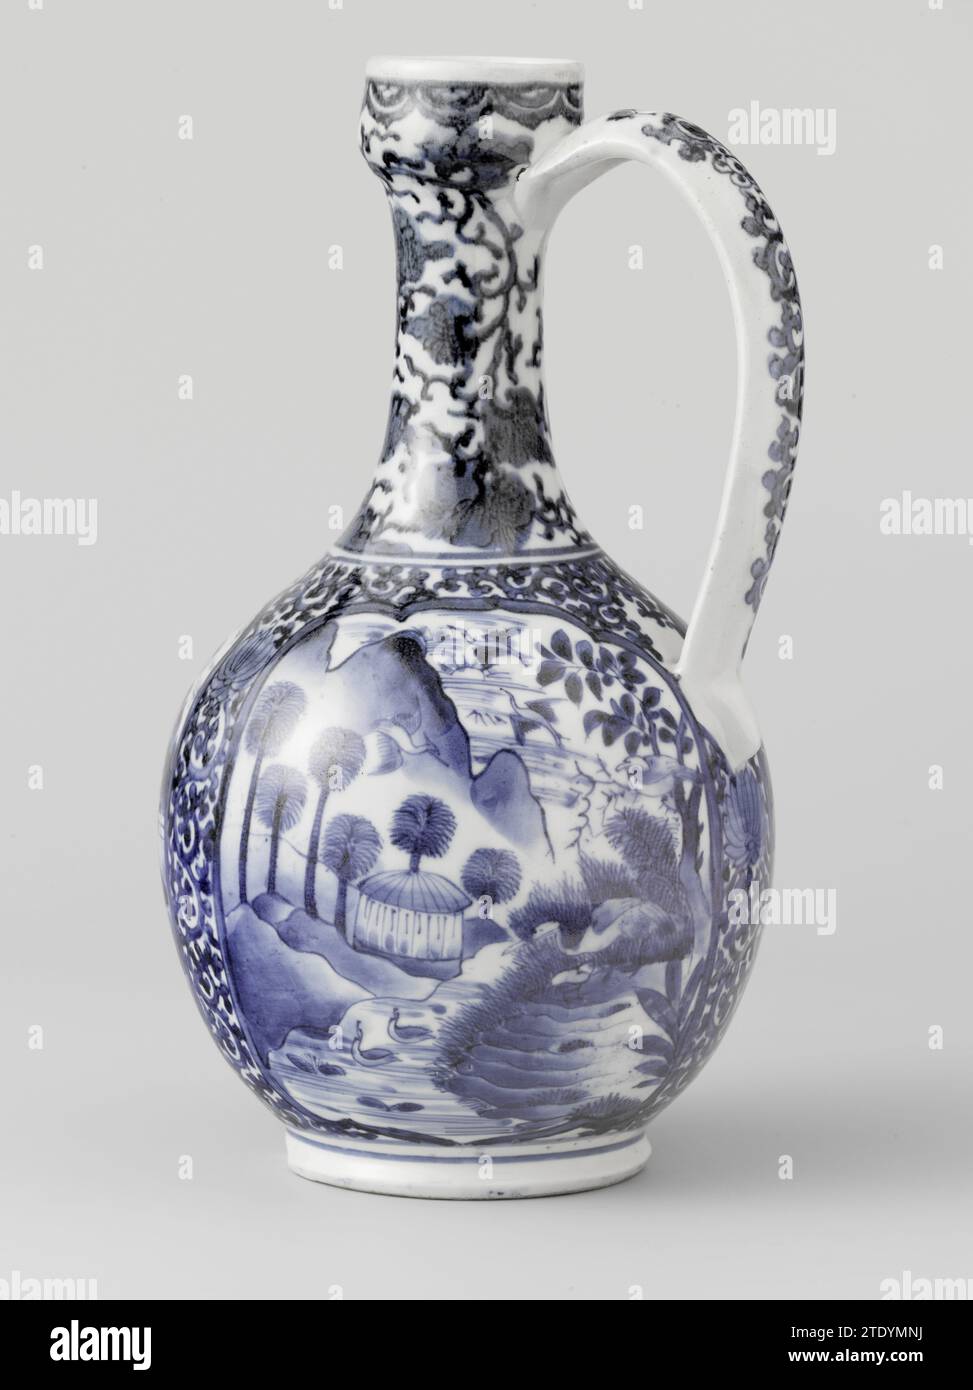 Ewer with landscapes in panels and floral scrolls, anonymous, c. 1655 - c. 1680 Can be made of porcelain with spherical body, C-shaped ear and small, triangular spout from the edge, painted in underlaze blue. The belly is covered with 'Karakusa' vines containing three scalloped cartouches. The middle catouche with two men in a landscape, one with a parasol and a fan, the other with a closed parasol and a dog. To the left of this a cartouche with cranes in a landscape with trees and rocks. The third cartouche with different birds in a landscape with a pavilion, mountains and a pond. The neck an Stock Photo